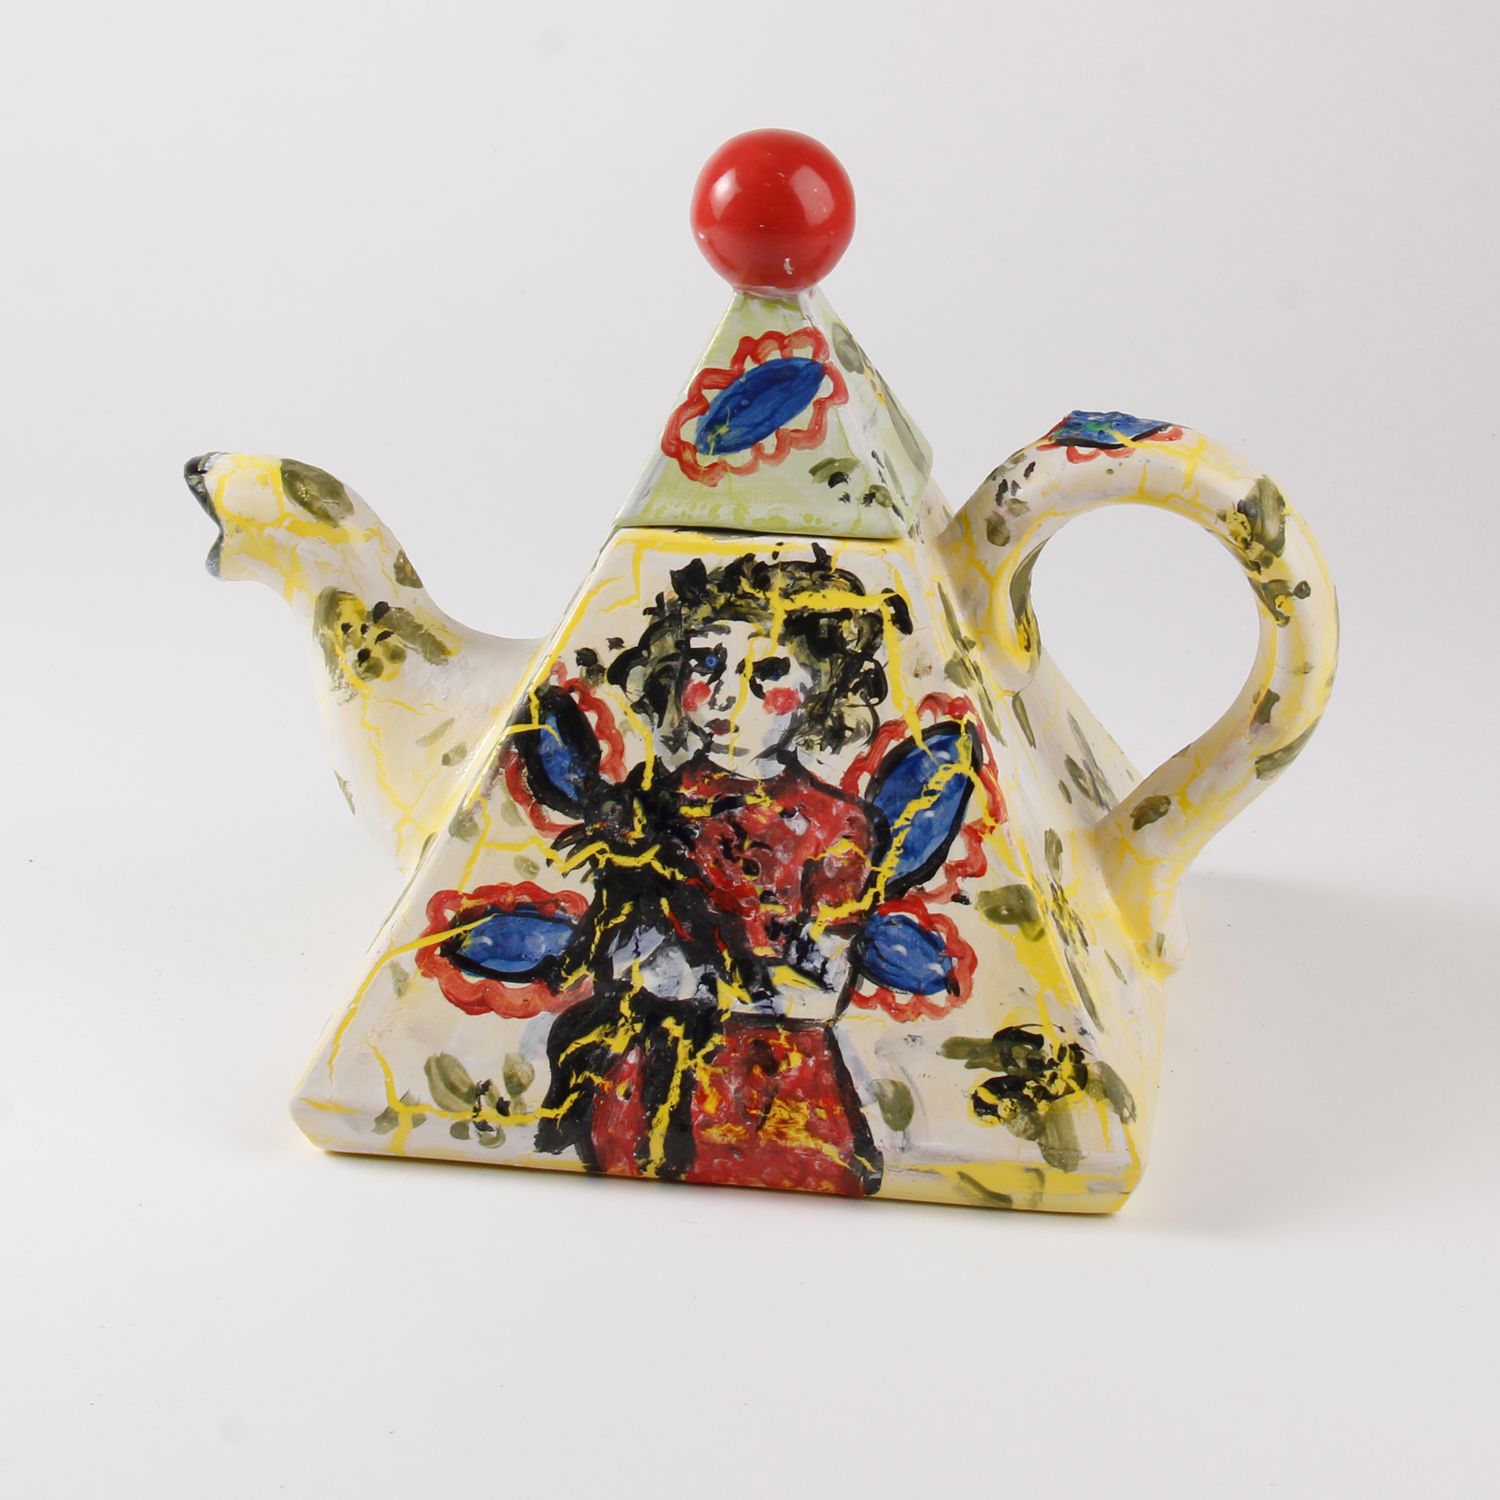 Patricia Lazar: Triangle Teapot Product Image 1 of 4